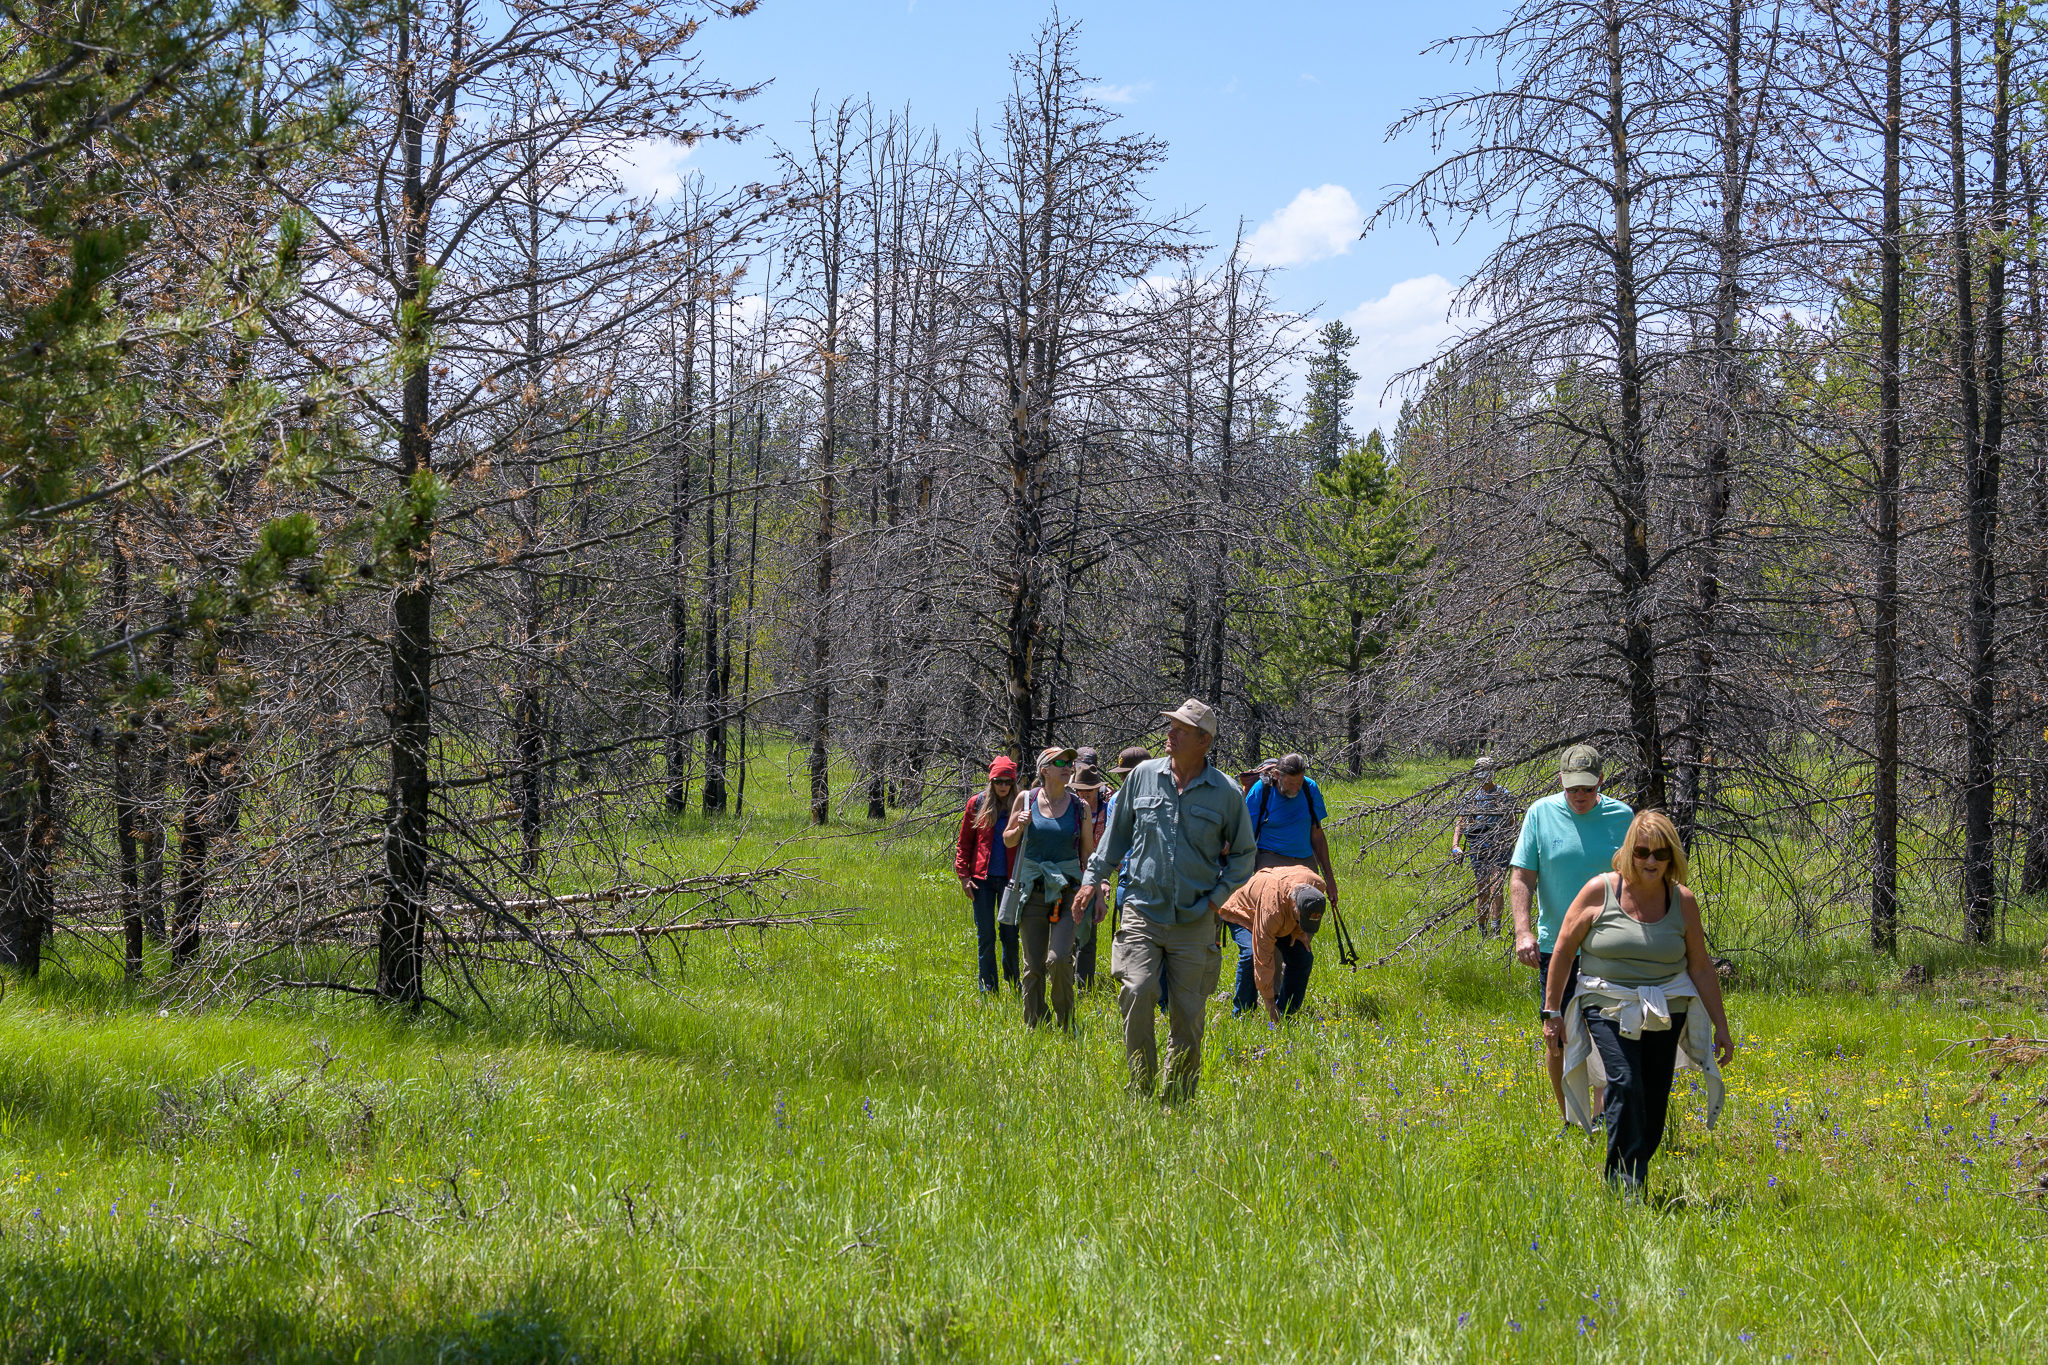 people walk through a forest looking at burned trees from a previous wildfire. Location is a fire ecology fieldtrip with forest service fire experts